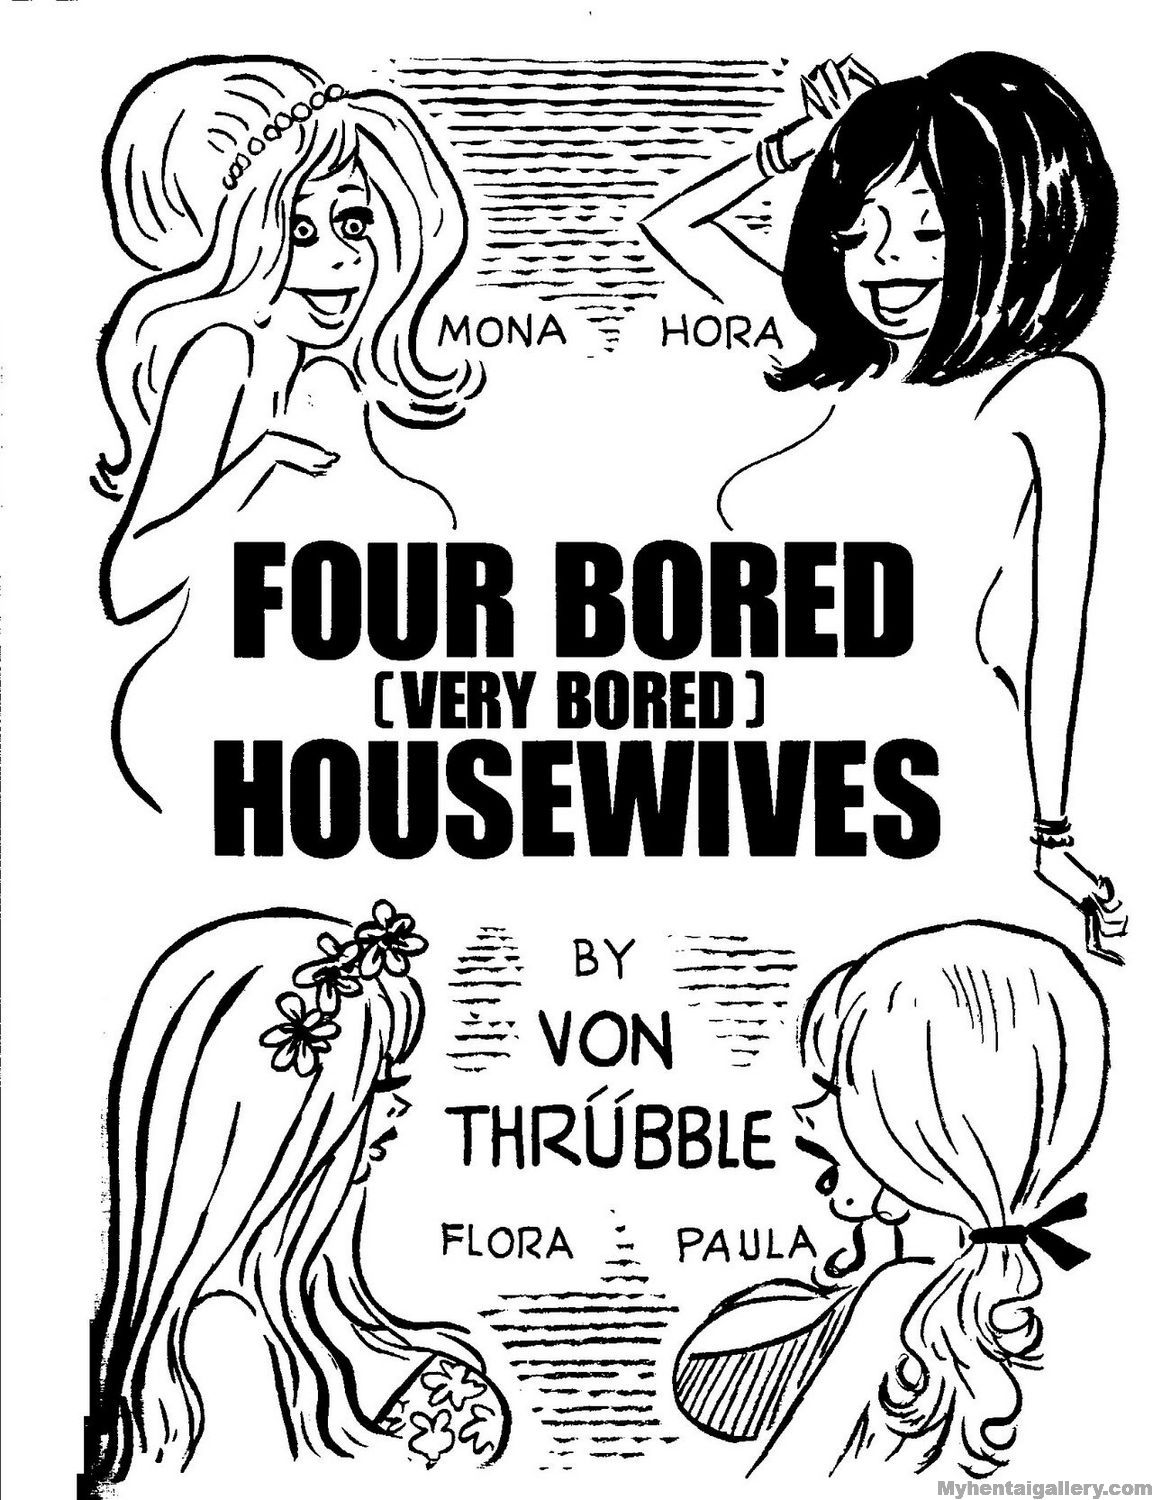 Four Very Bored Housewives 6 - Paula Chomps Chicken Chucker Champ